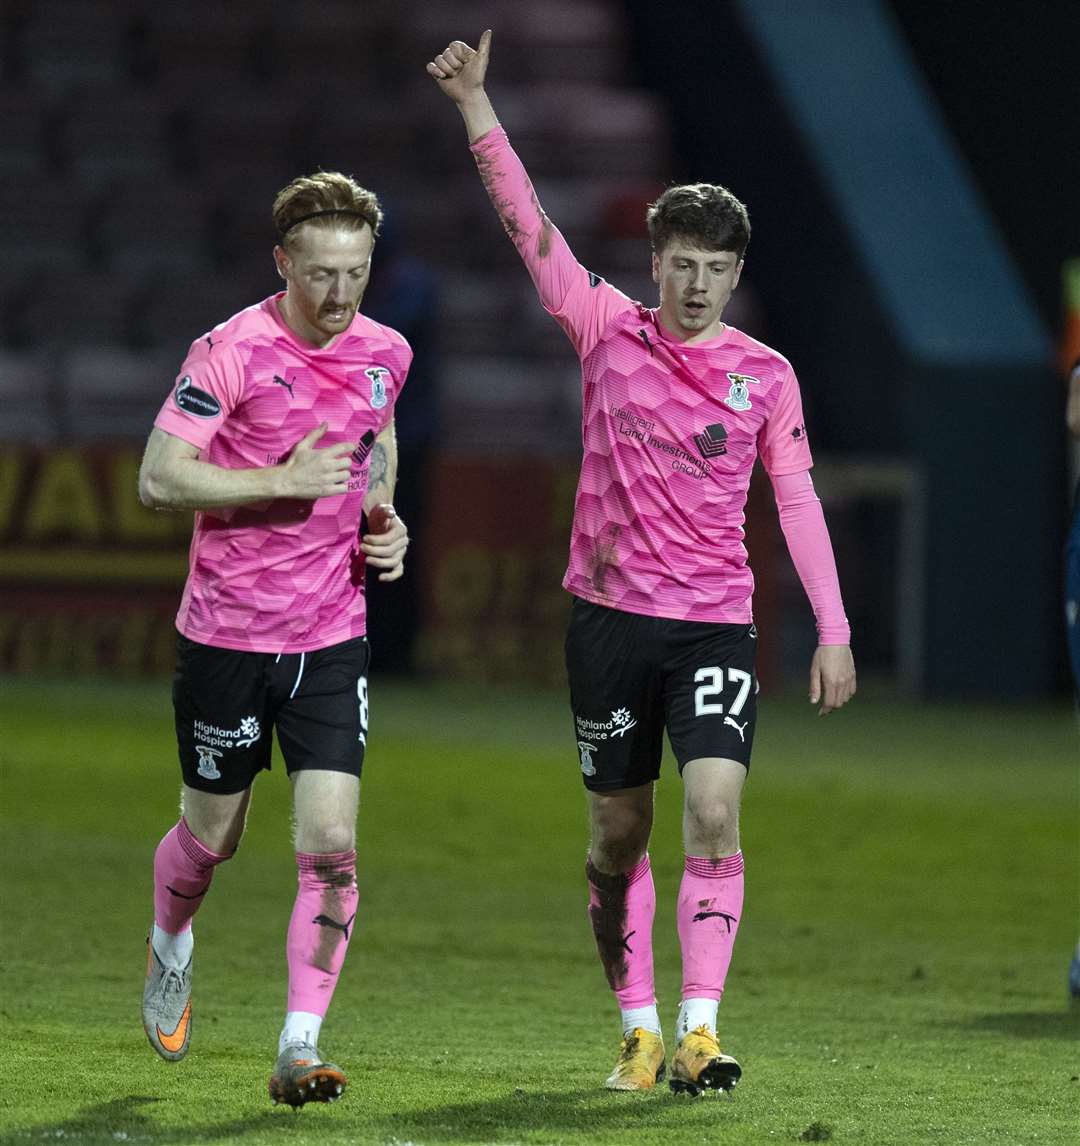 Picture - Ken Macpherson, Inverness. Scottish Cup 3rd Round. Ross County(1) v Inverness CT(3). 02.04.21. ICT’s Daniel Mackay celebrates his goal.